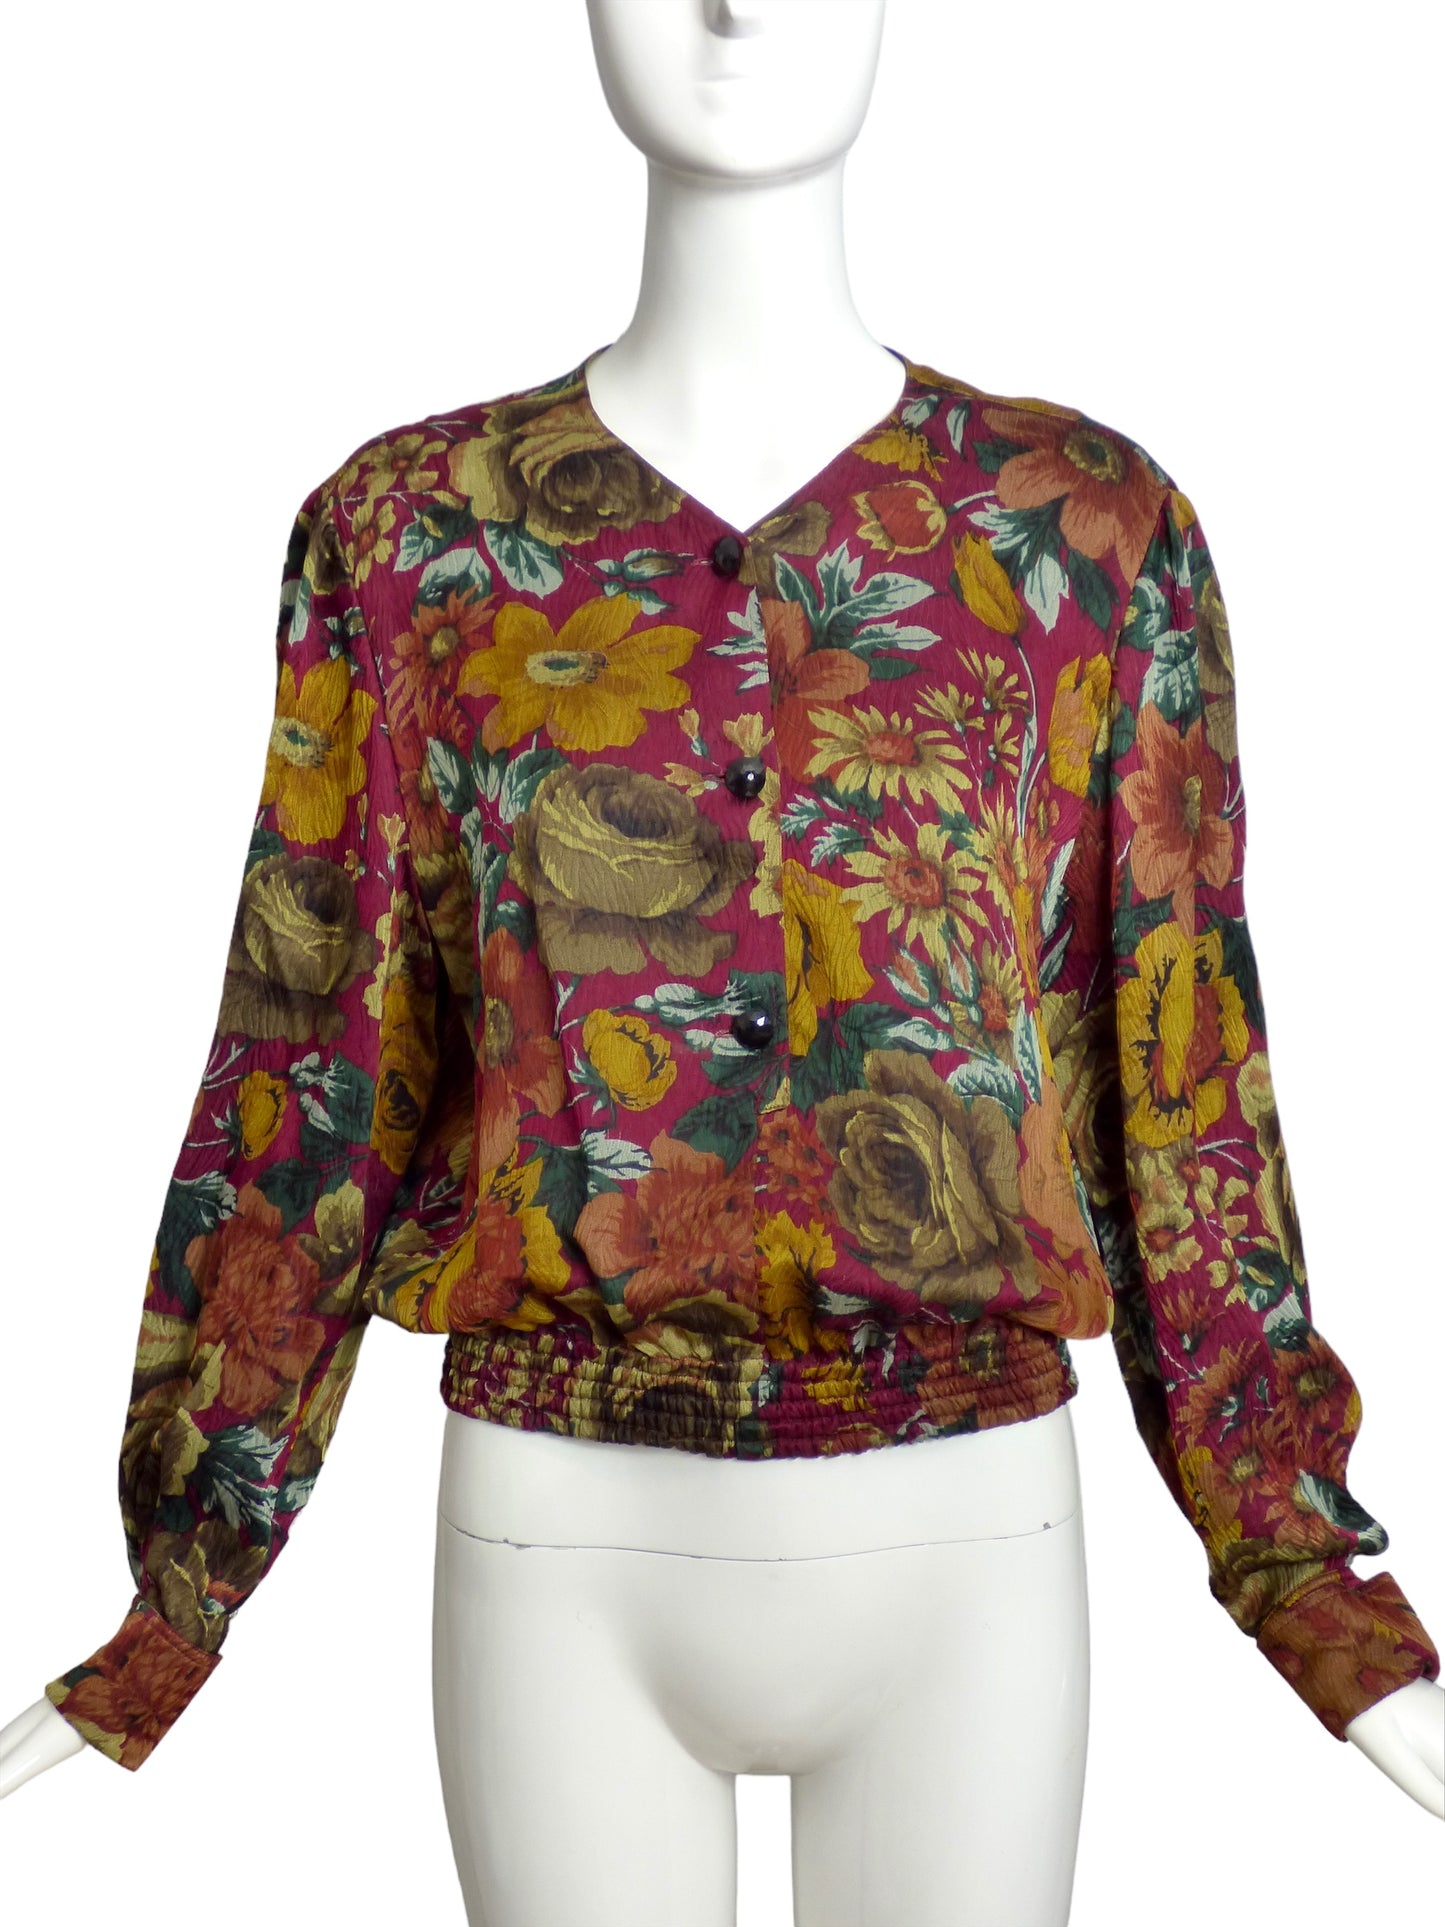 VALENTINO- 1980s Floral Silk Print Blouse, Size 8